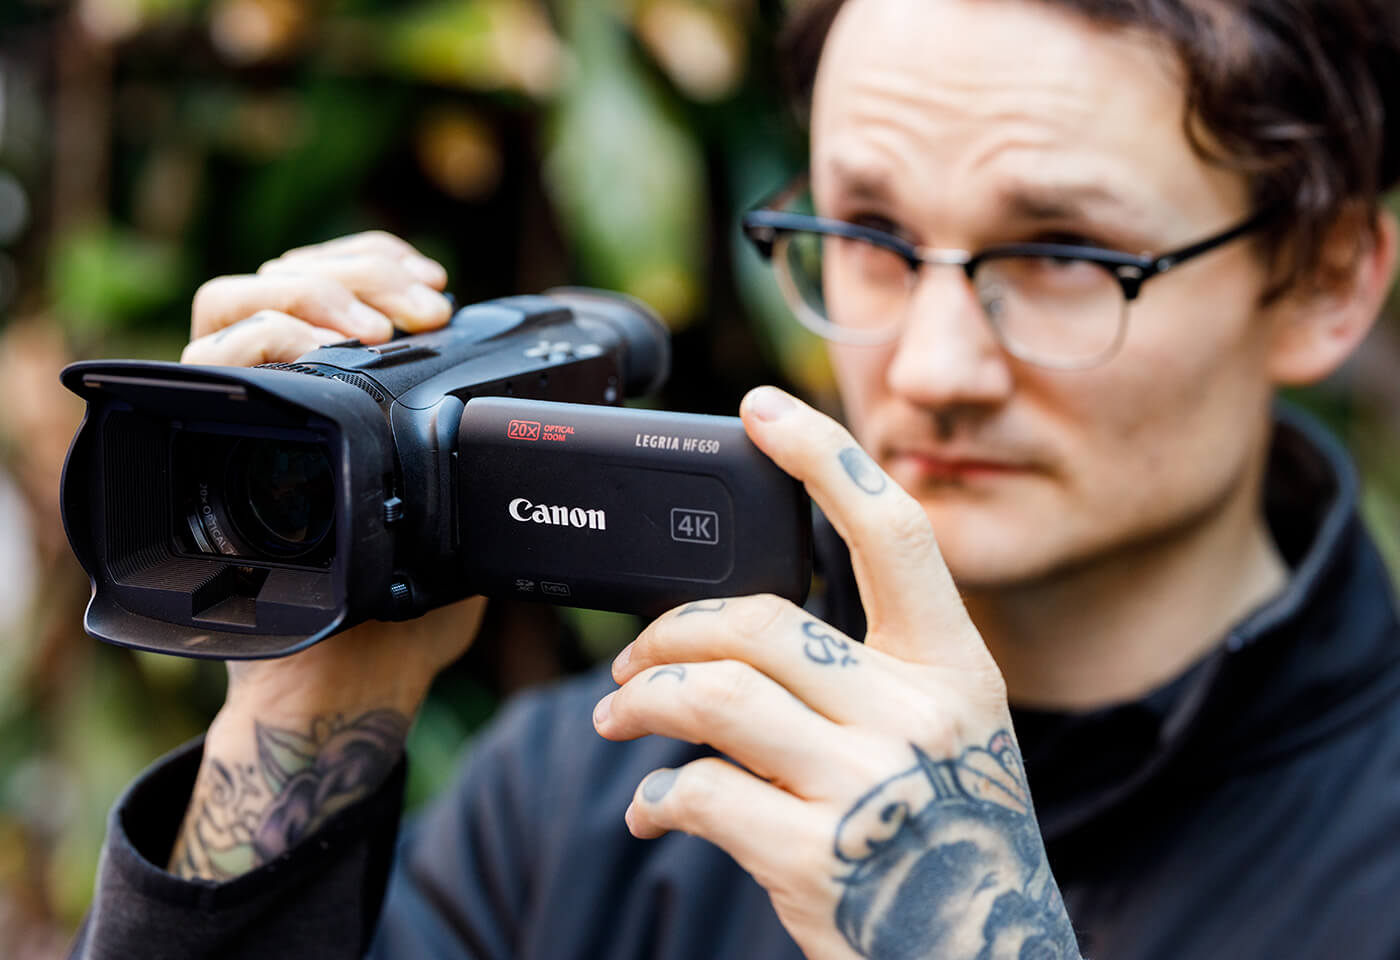 Neal Walters with a Canon camcorder